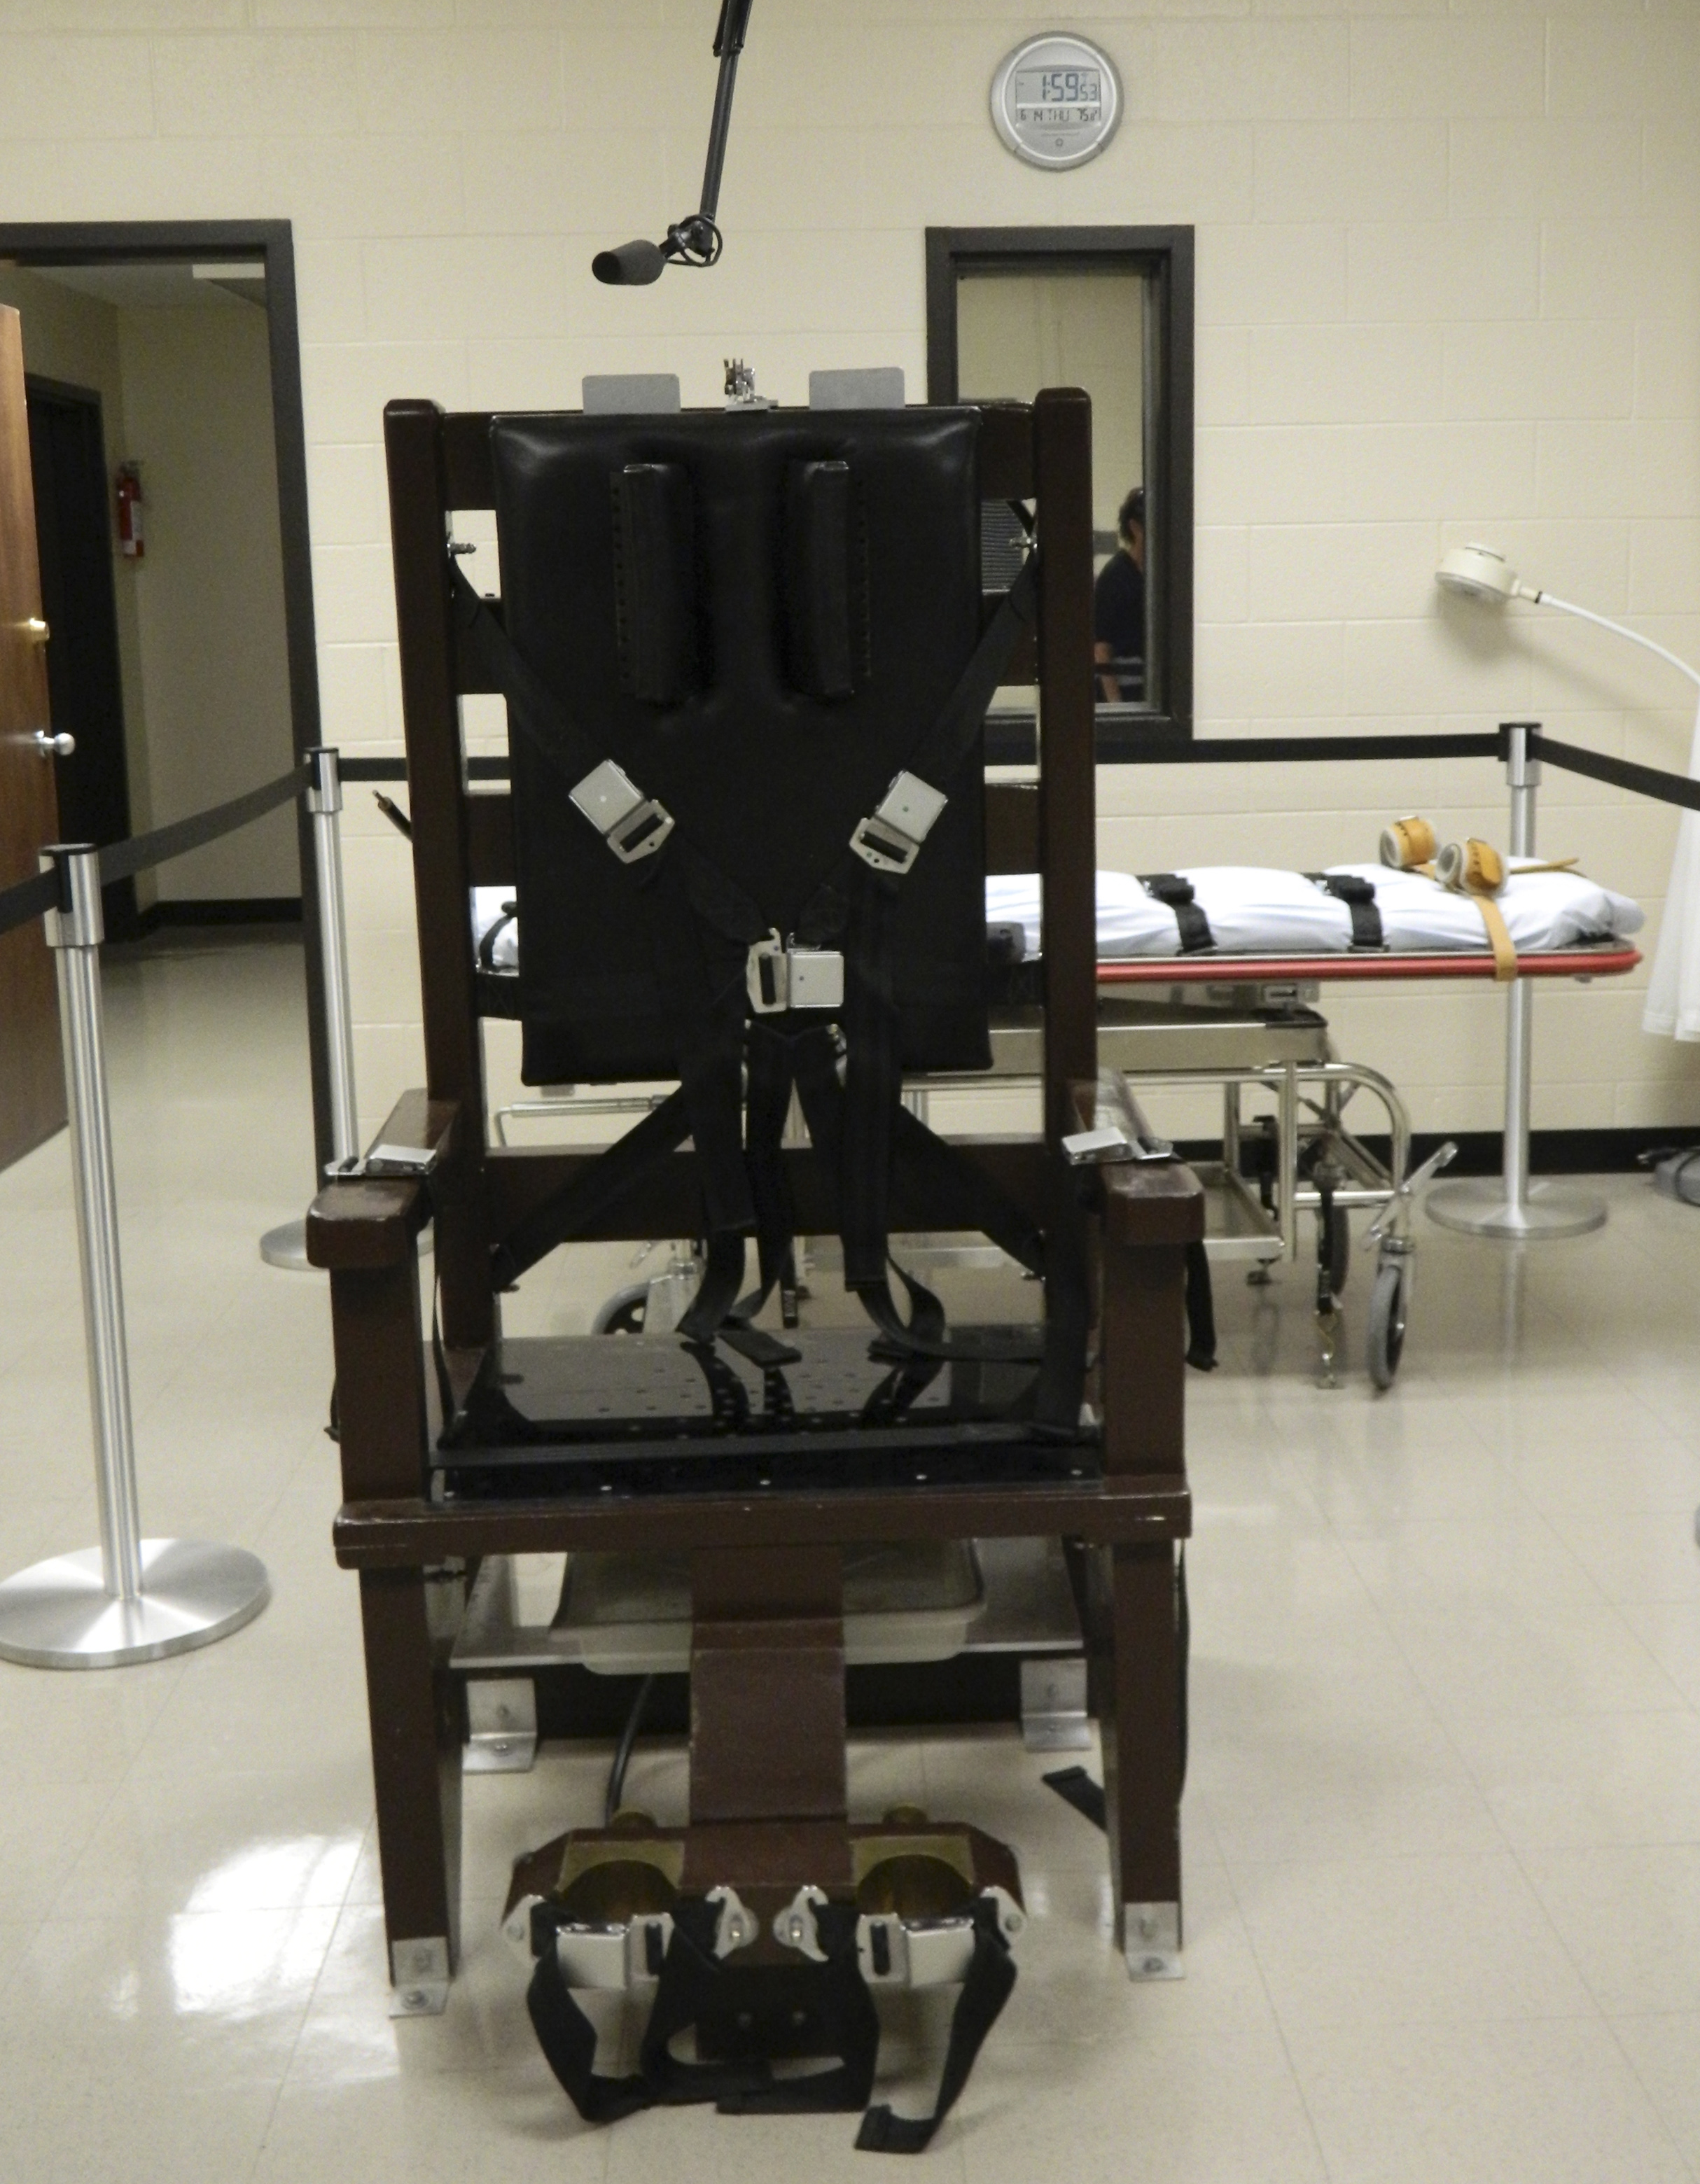 An electric chair, nicknamed "Old Sparky", is seen at the Riverbend Maximum Security Institution in this undated handout photo provided by Tennessee's Department of Correction in Nashville. REUTERS/Tennessee Department of Correction/Handout via Reuters 